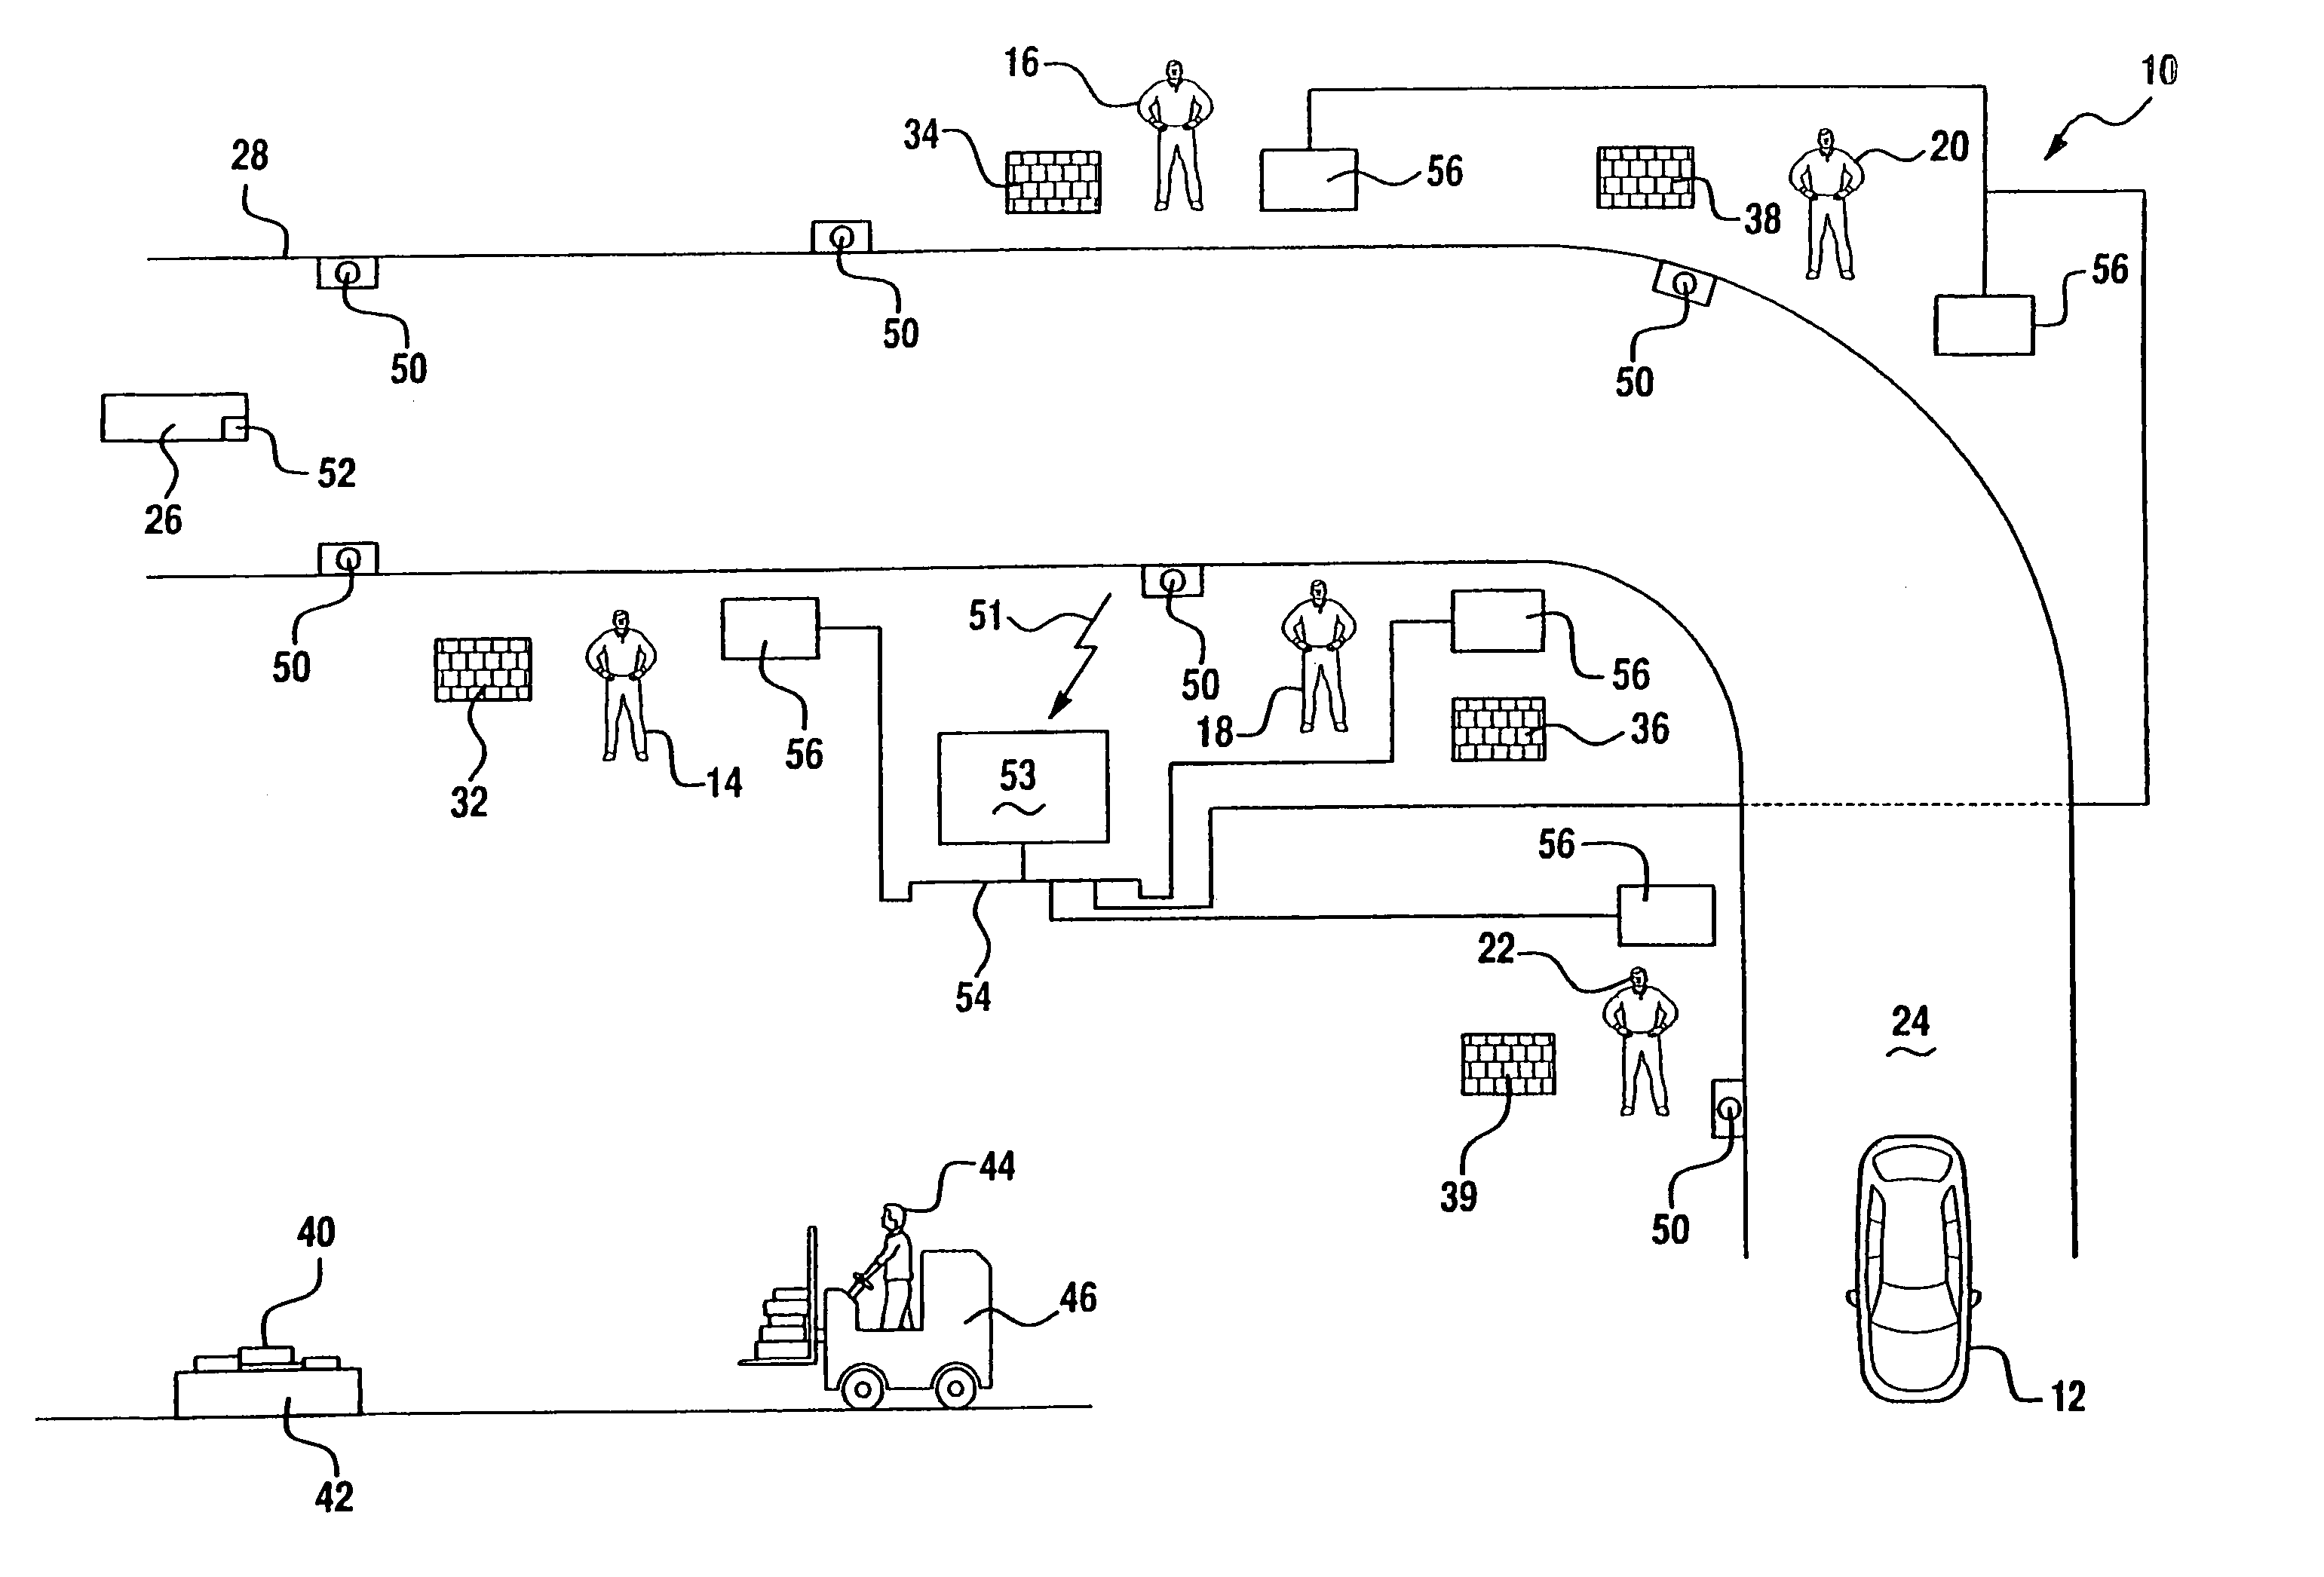 Method for manufacturing an item